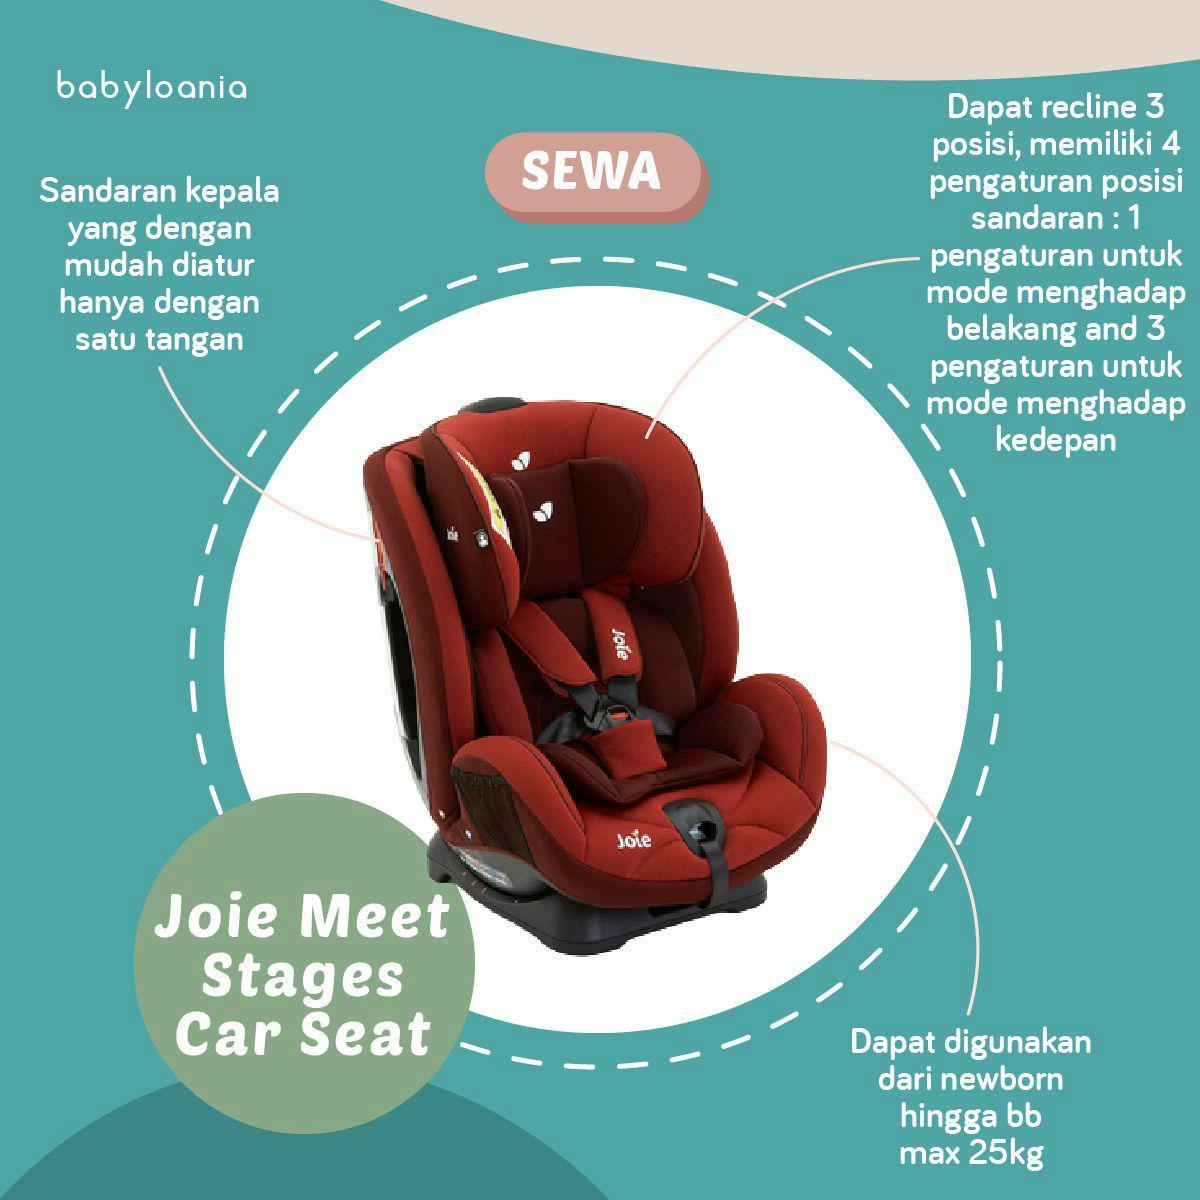 Meet Stages Car Seat